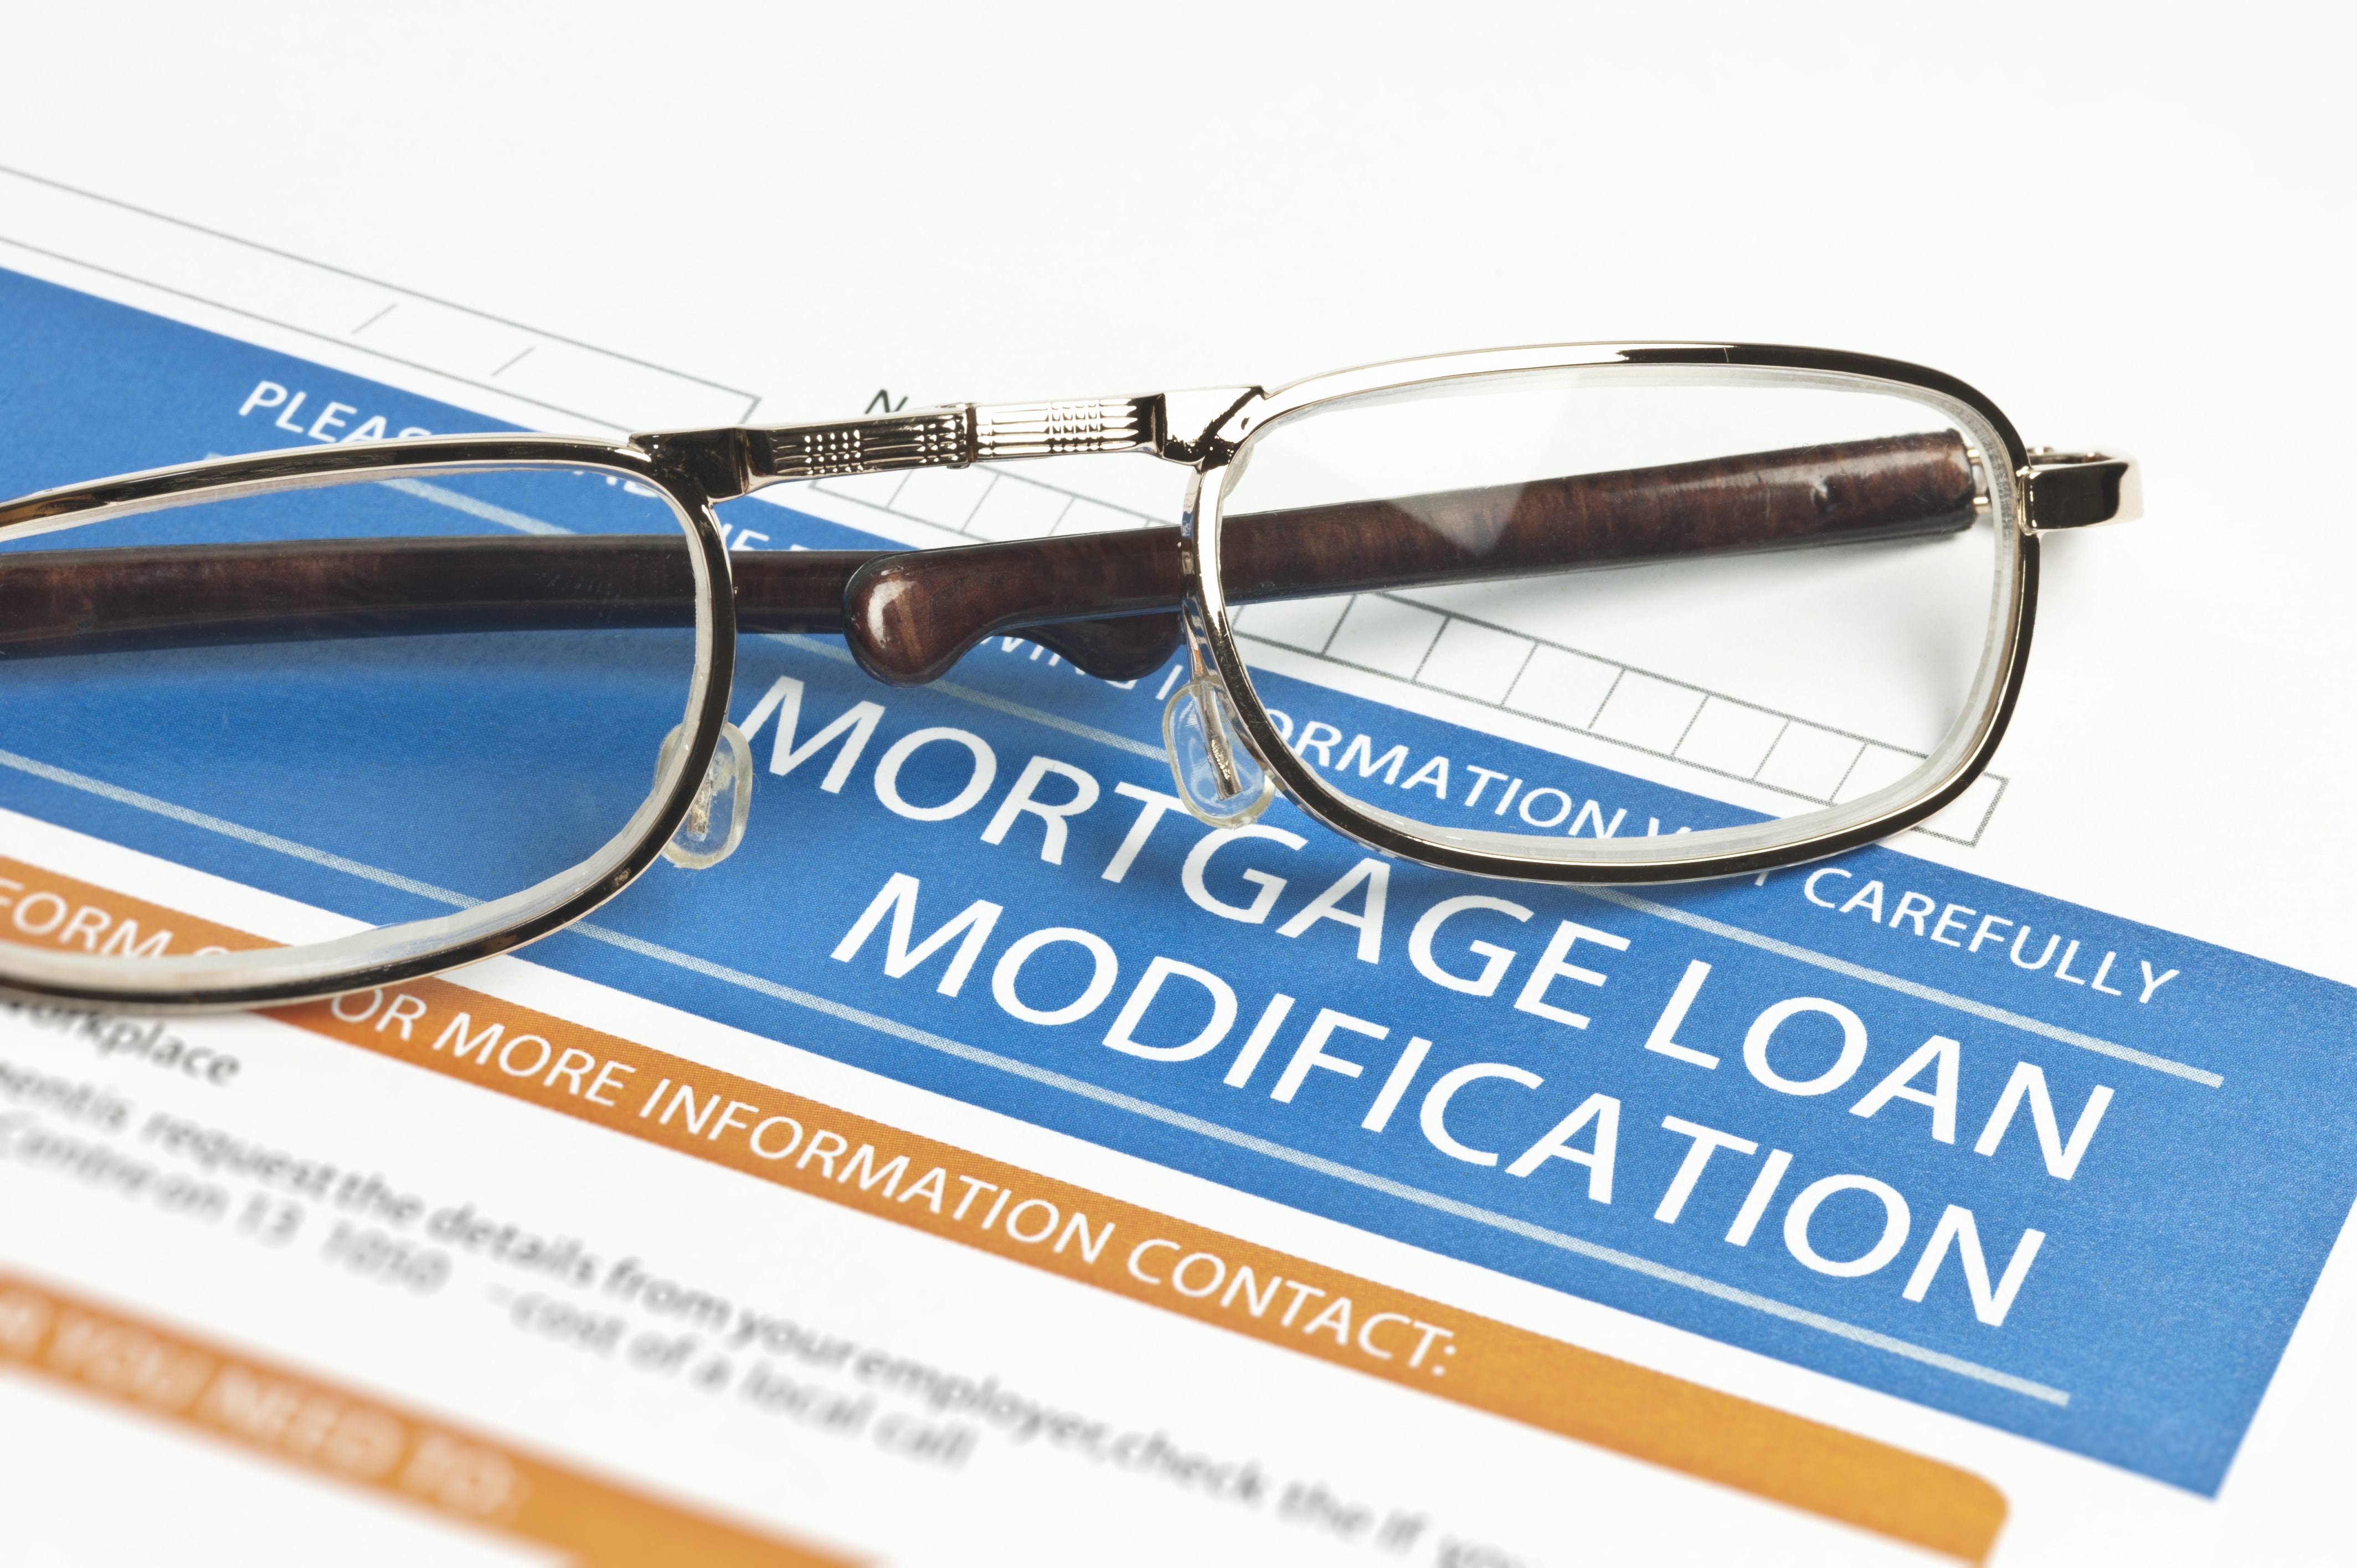 Mortgage loan modification form with eyeglasses on top.